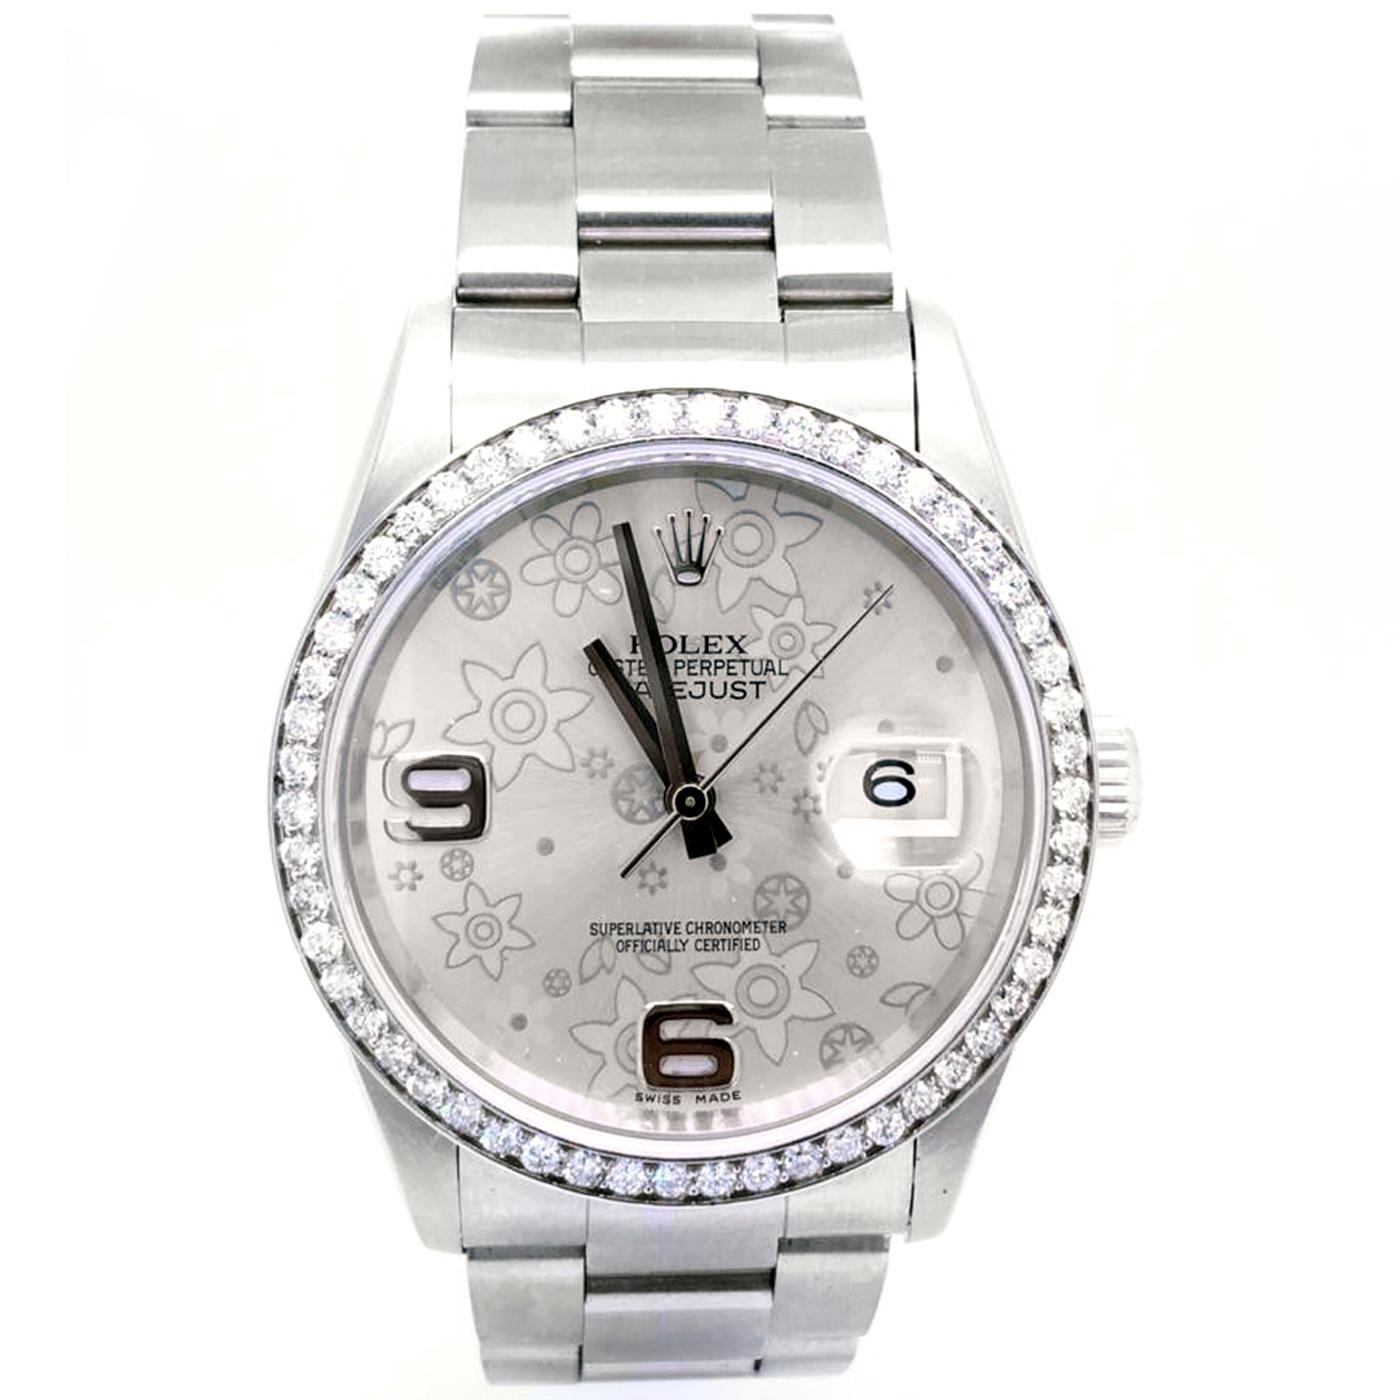 Stainless steel case with a stainless steel Oyster bracelet. Diamond bezel and floral motif dial with silver-tone hands and Arab hour markers. Dial Type: Analog. Date display at the 3 o'clock position. Automatic movement. Scratch-resistant sapphire